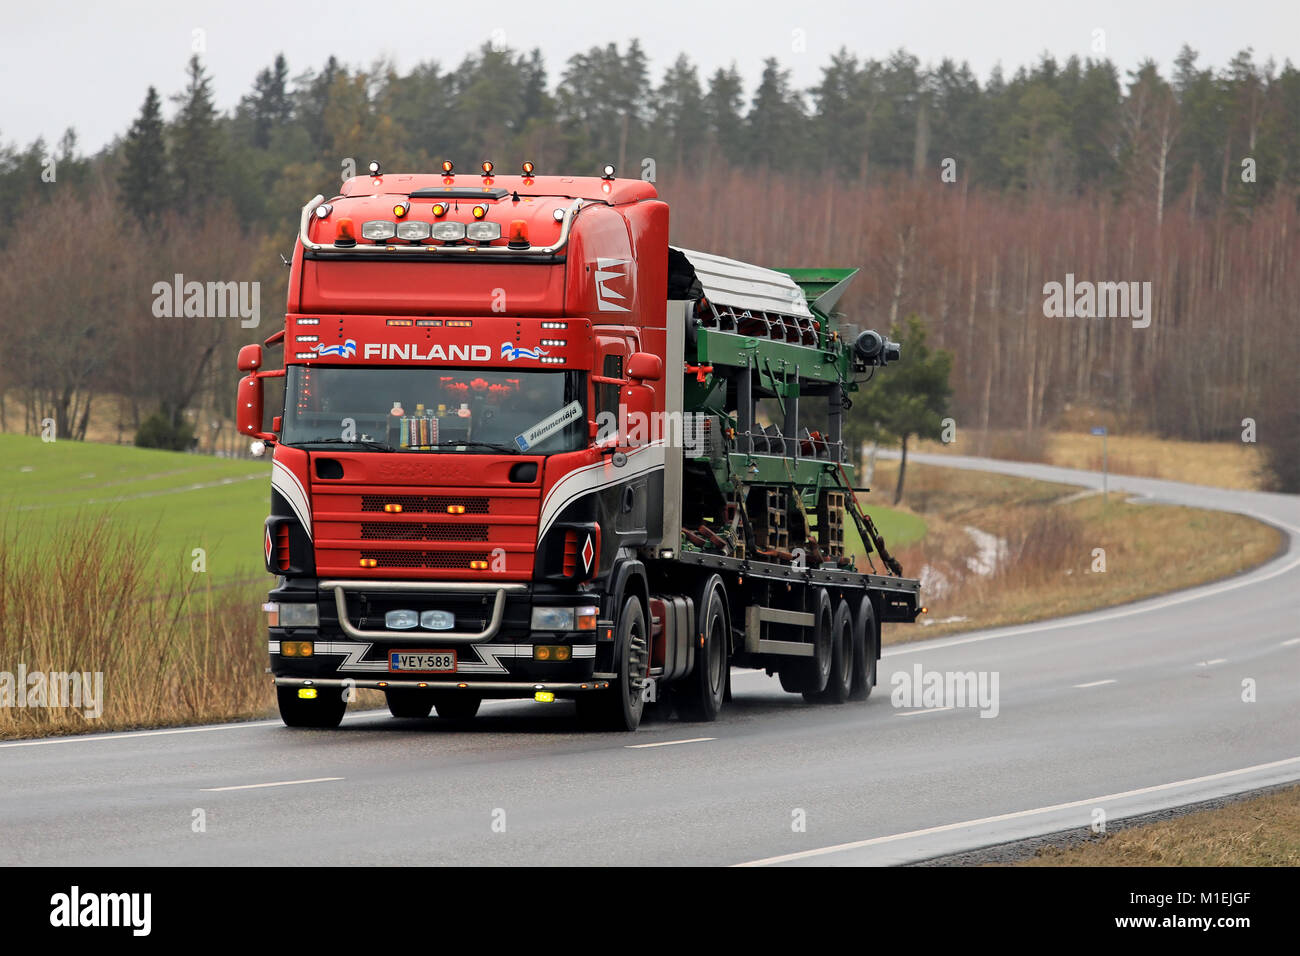 SALO, FINLAND - JANUARY 26, 2018: Customized 4-series Scania truck hauls machinery along rural highway in South of Finland. Stock Photo